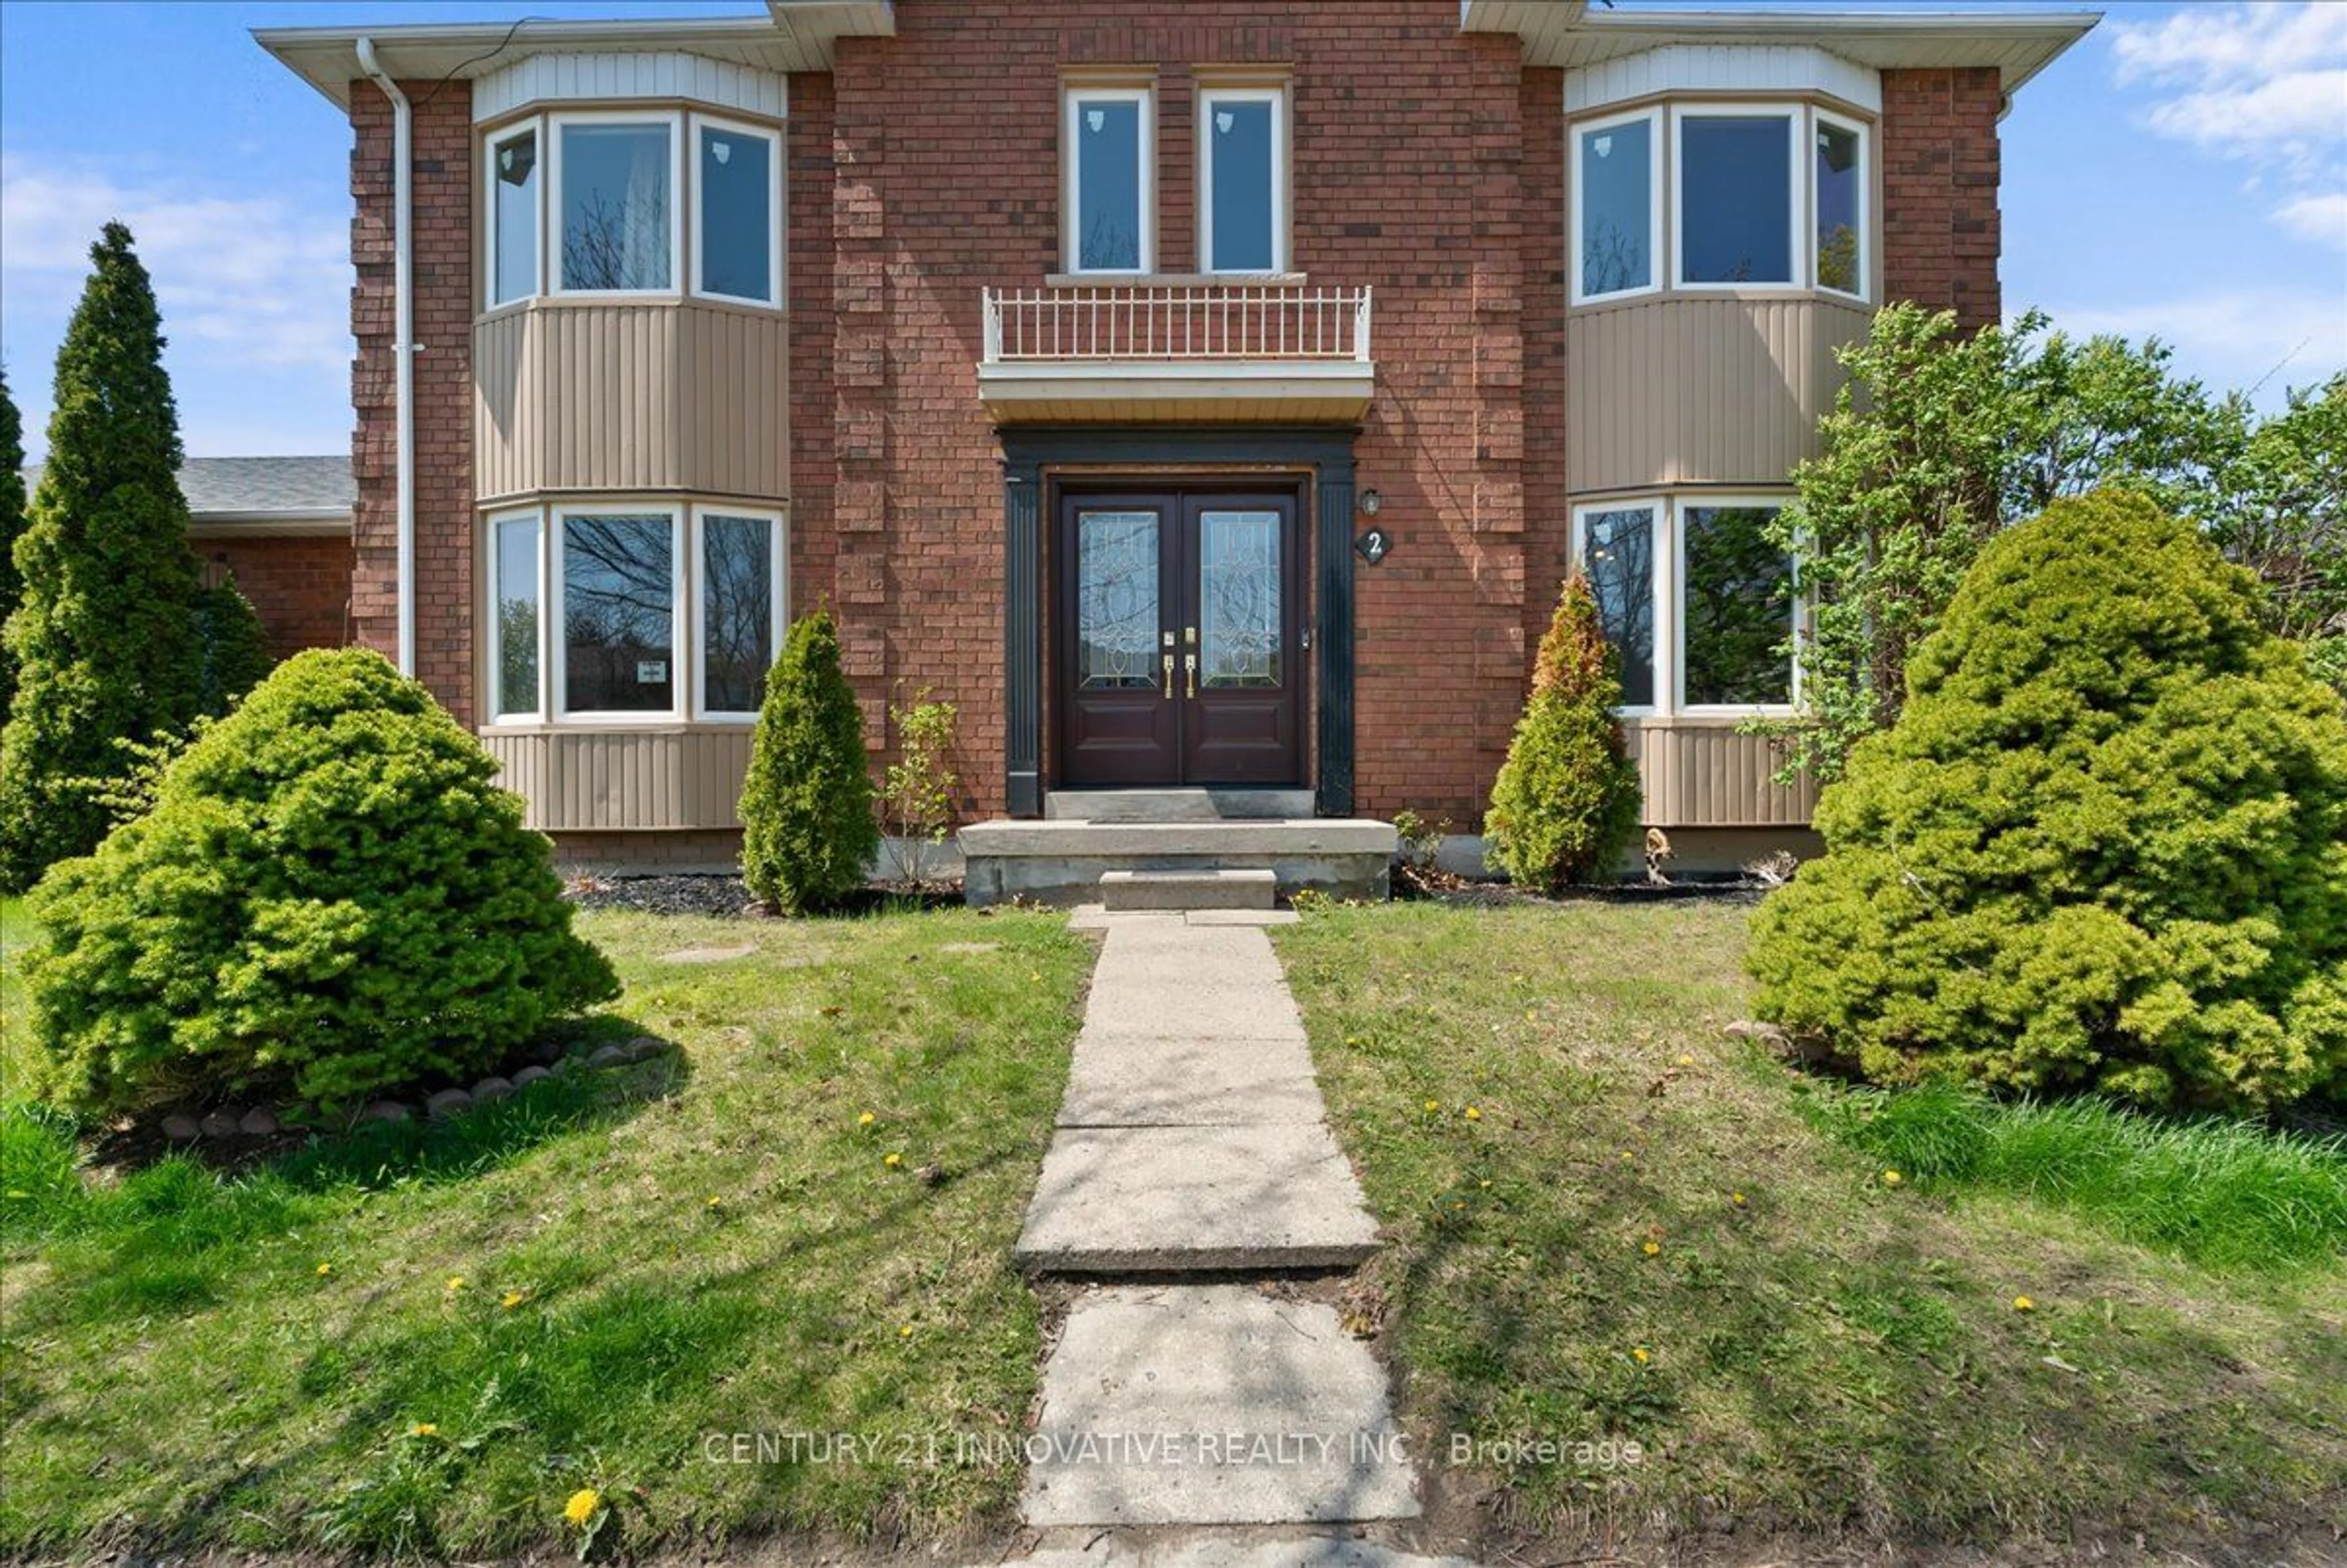 Home with brick exterior material for 2 Old Colony Dr, Whitby Ontario L1R 2A3